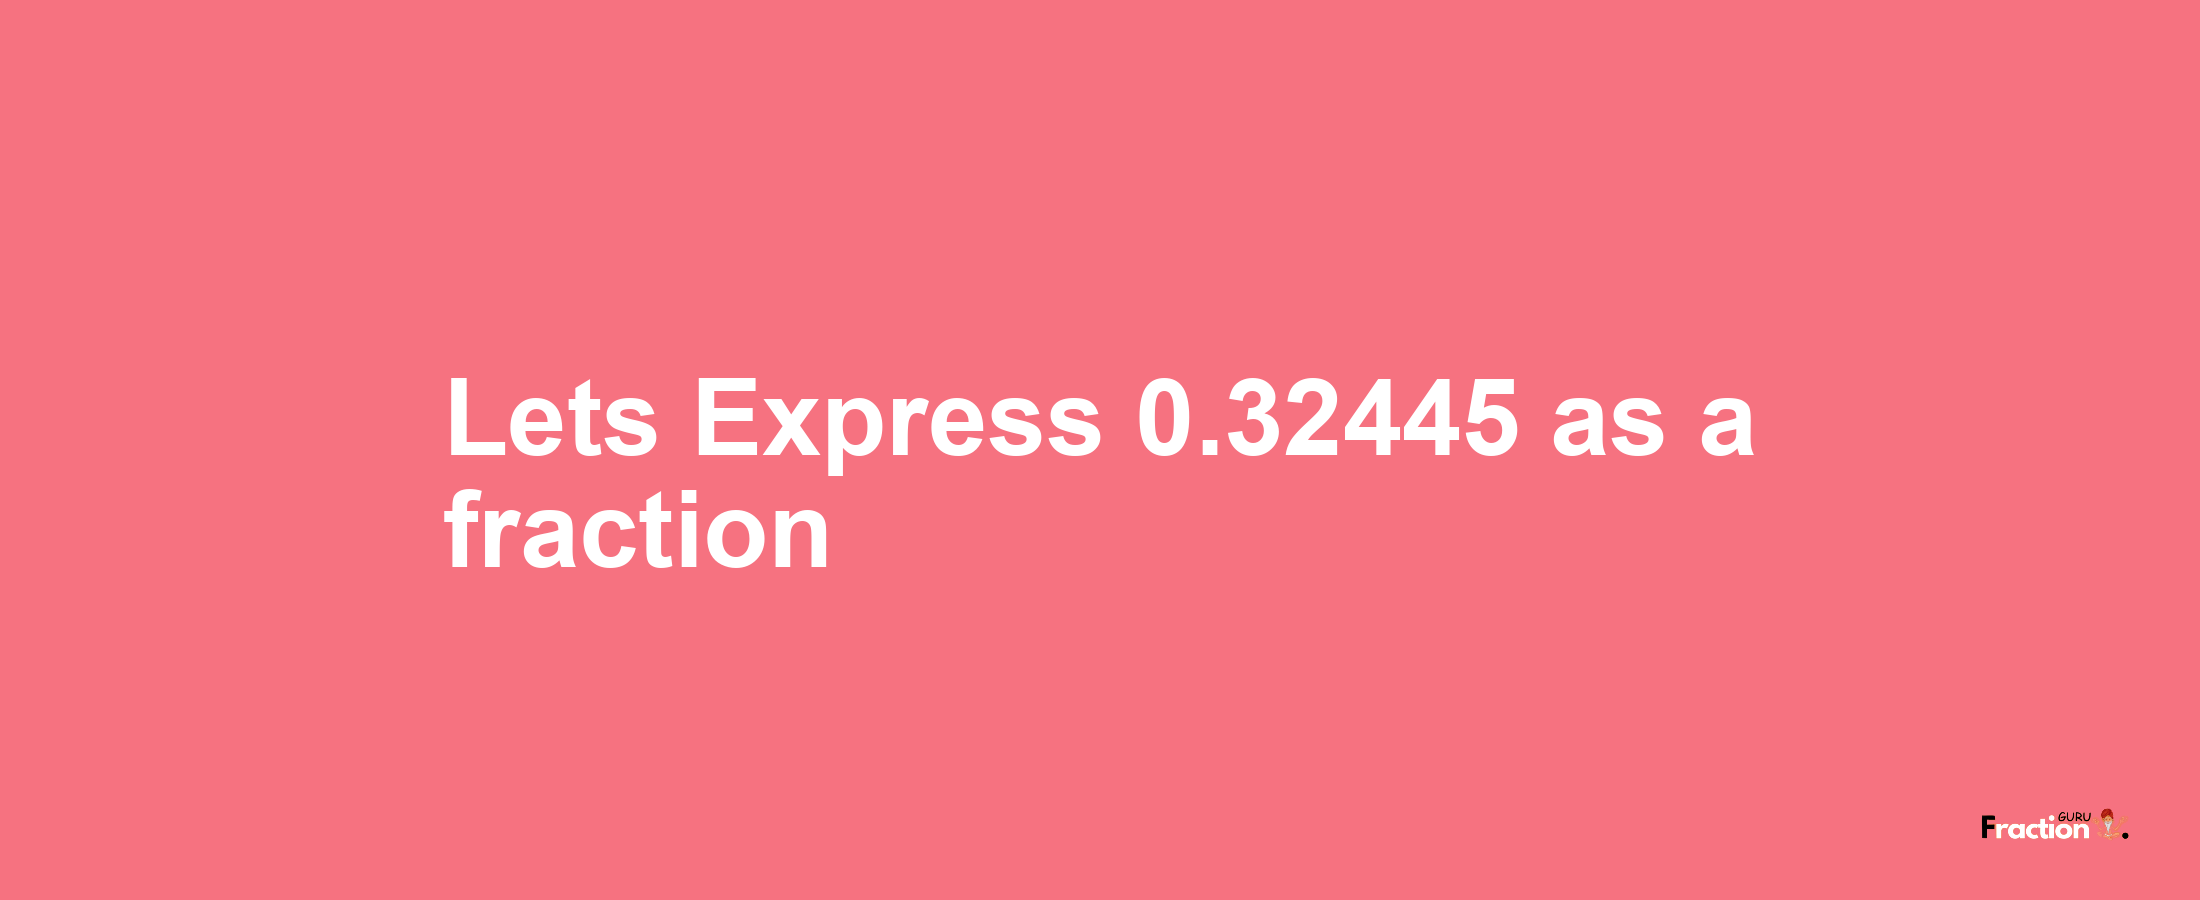 Lets Express 0.32445 as afraction